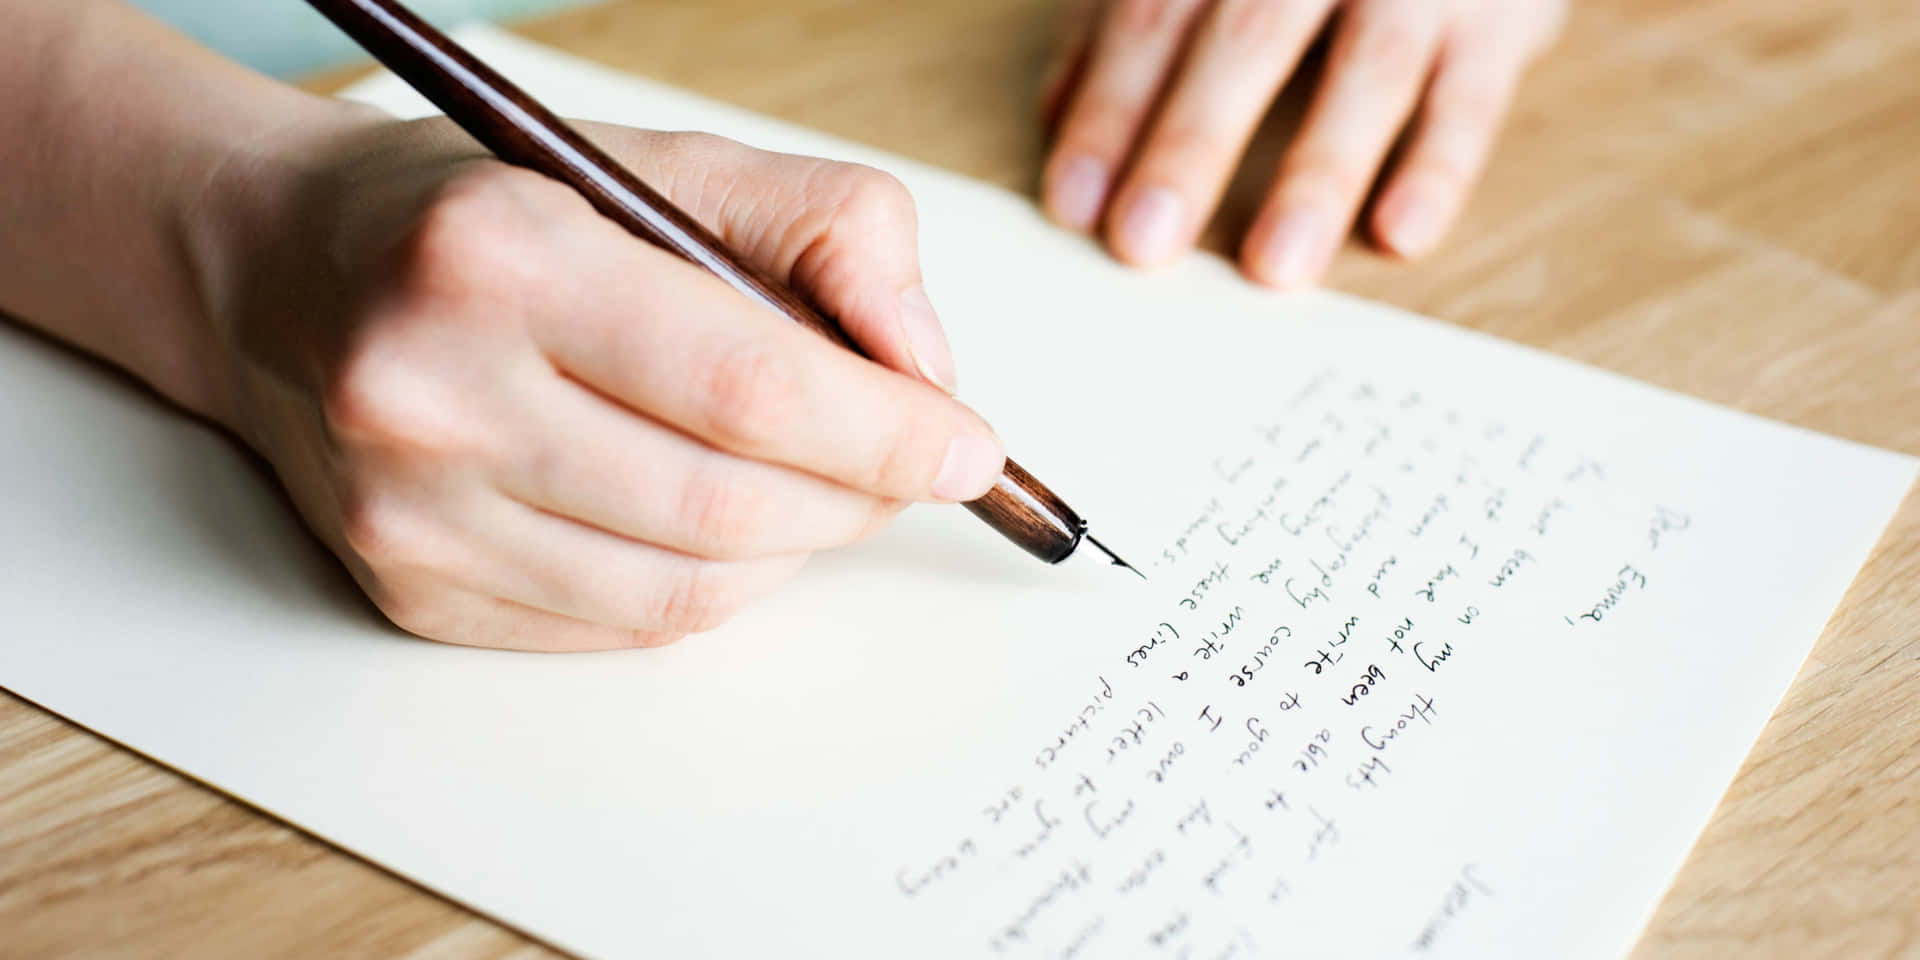 A Person Writing On A Piece Of Paper With A Pen